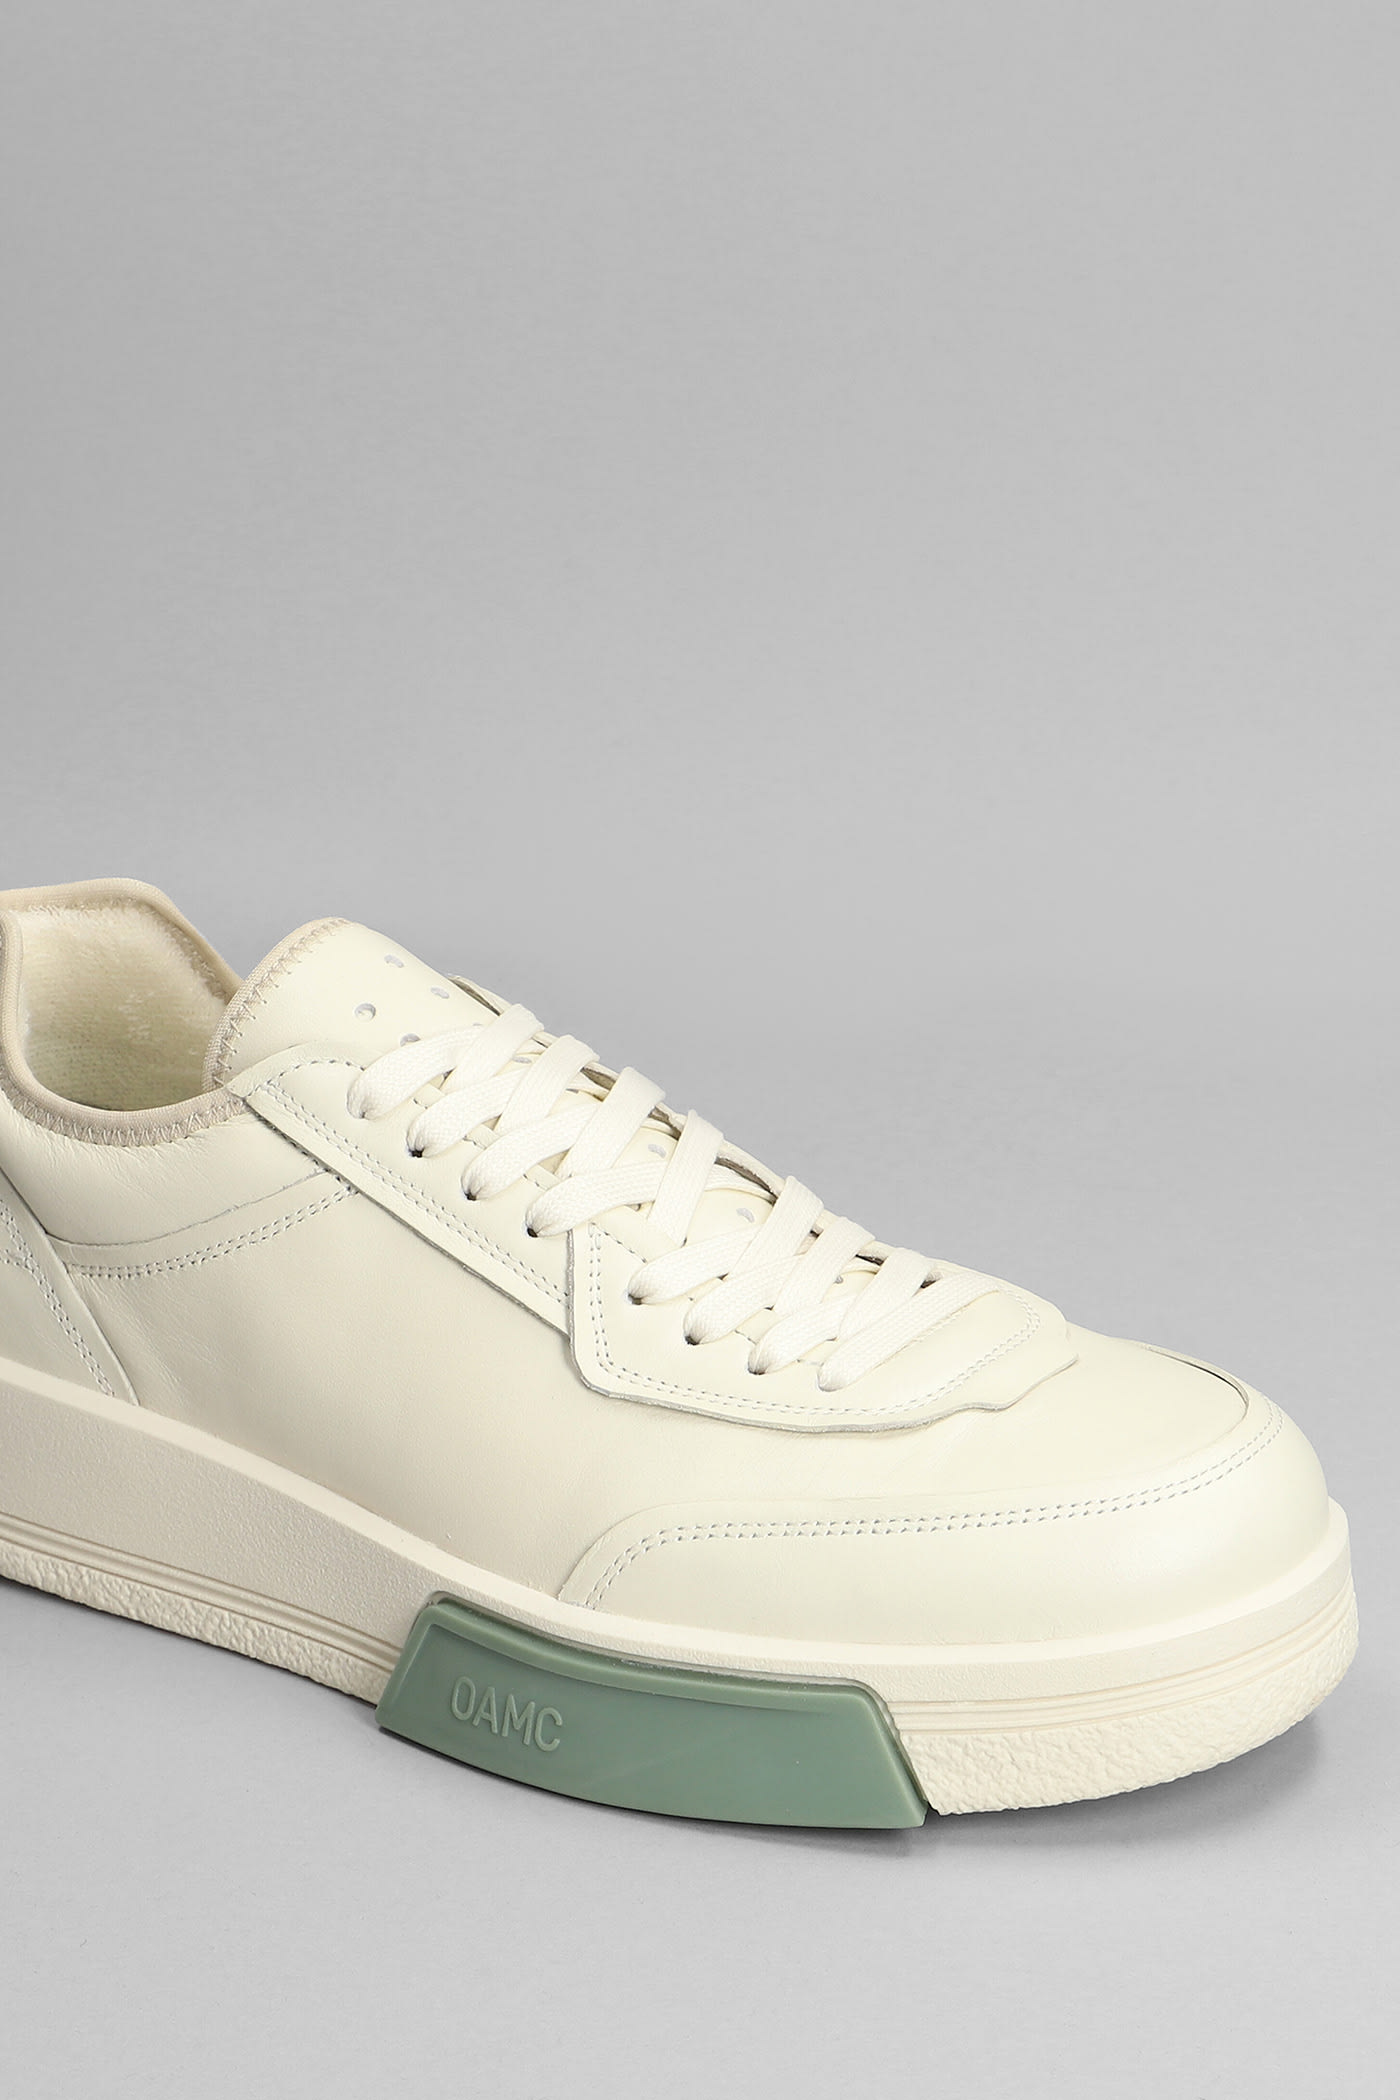 OAMC Cosmo Sneakers In White Leather スニーカー 通販 | italist